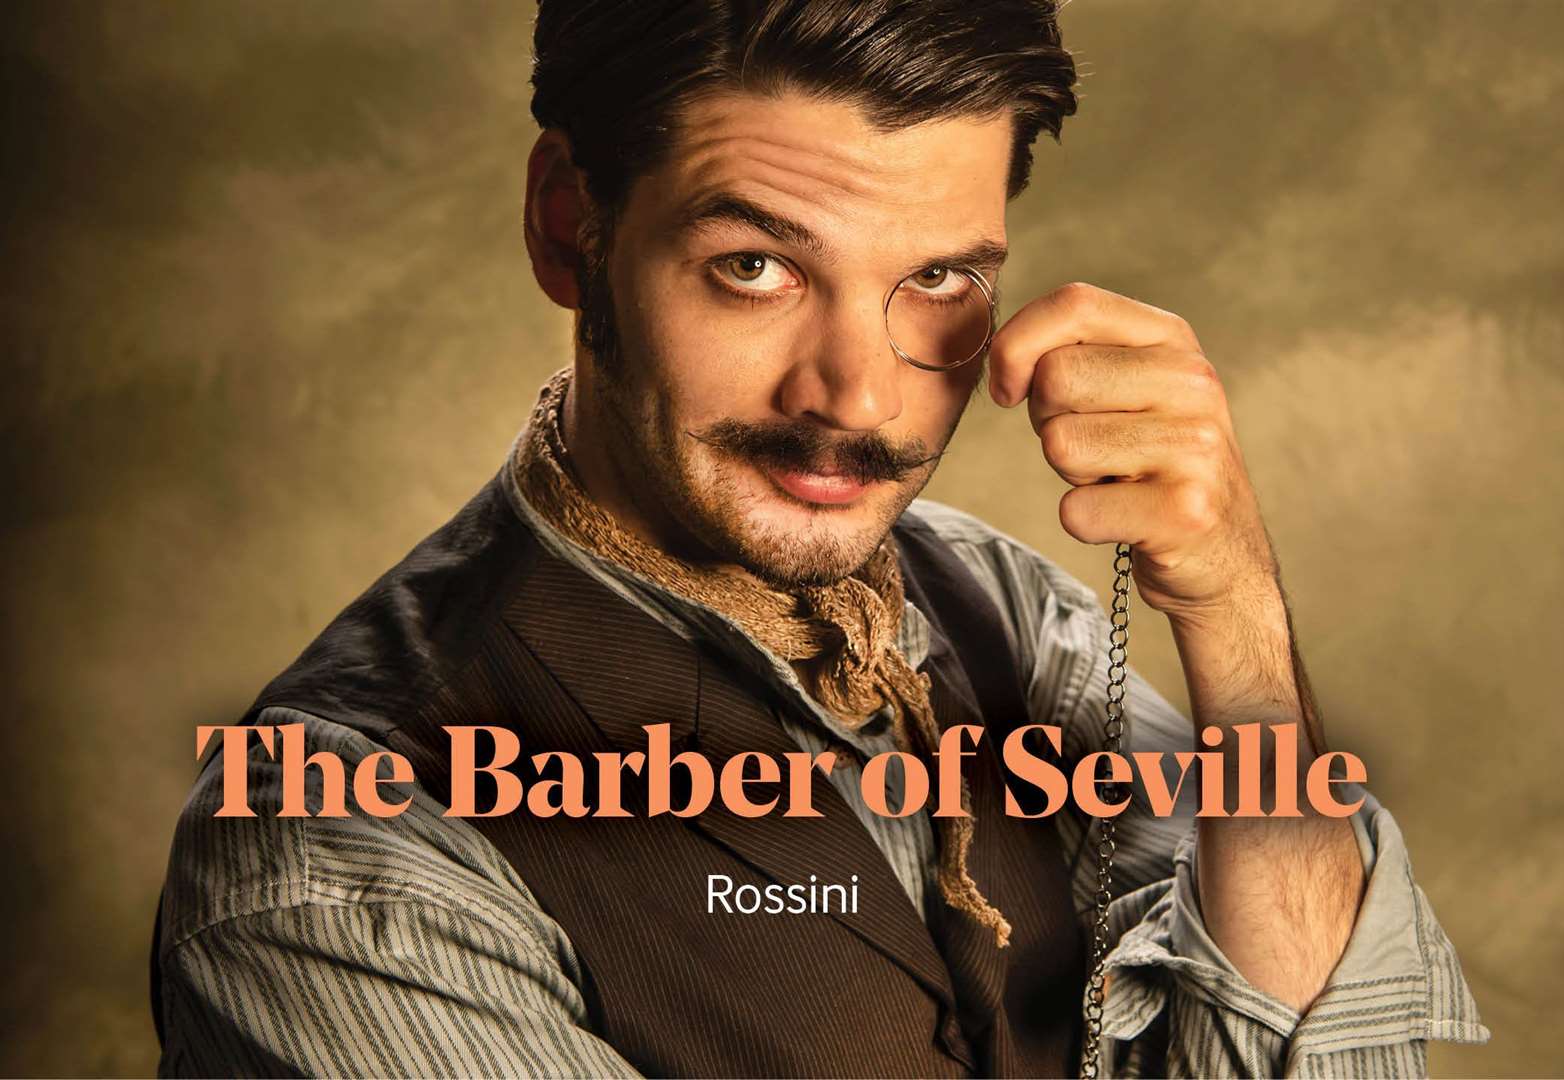 Rossini’s beloved comedy The Barber of Seville is coming to the Granite City this week.